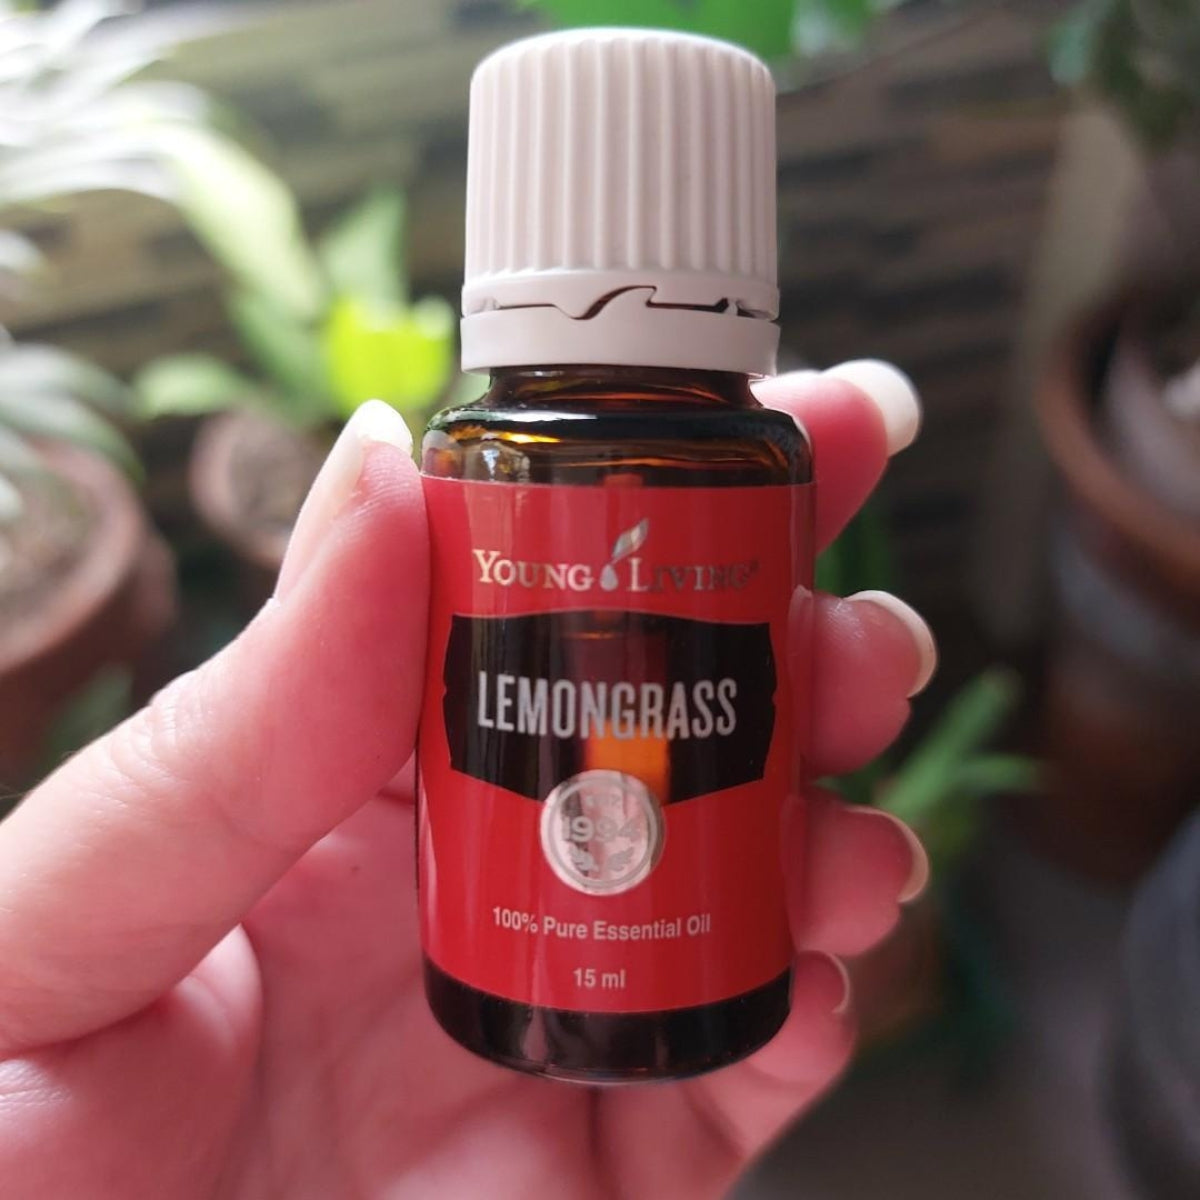 Lemongrass Essential Oil 15ml by Young Living Essential Oils